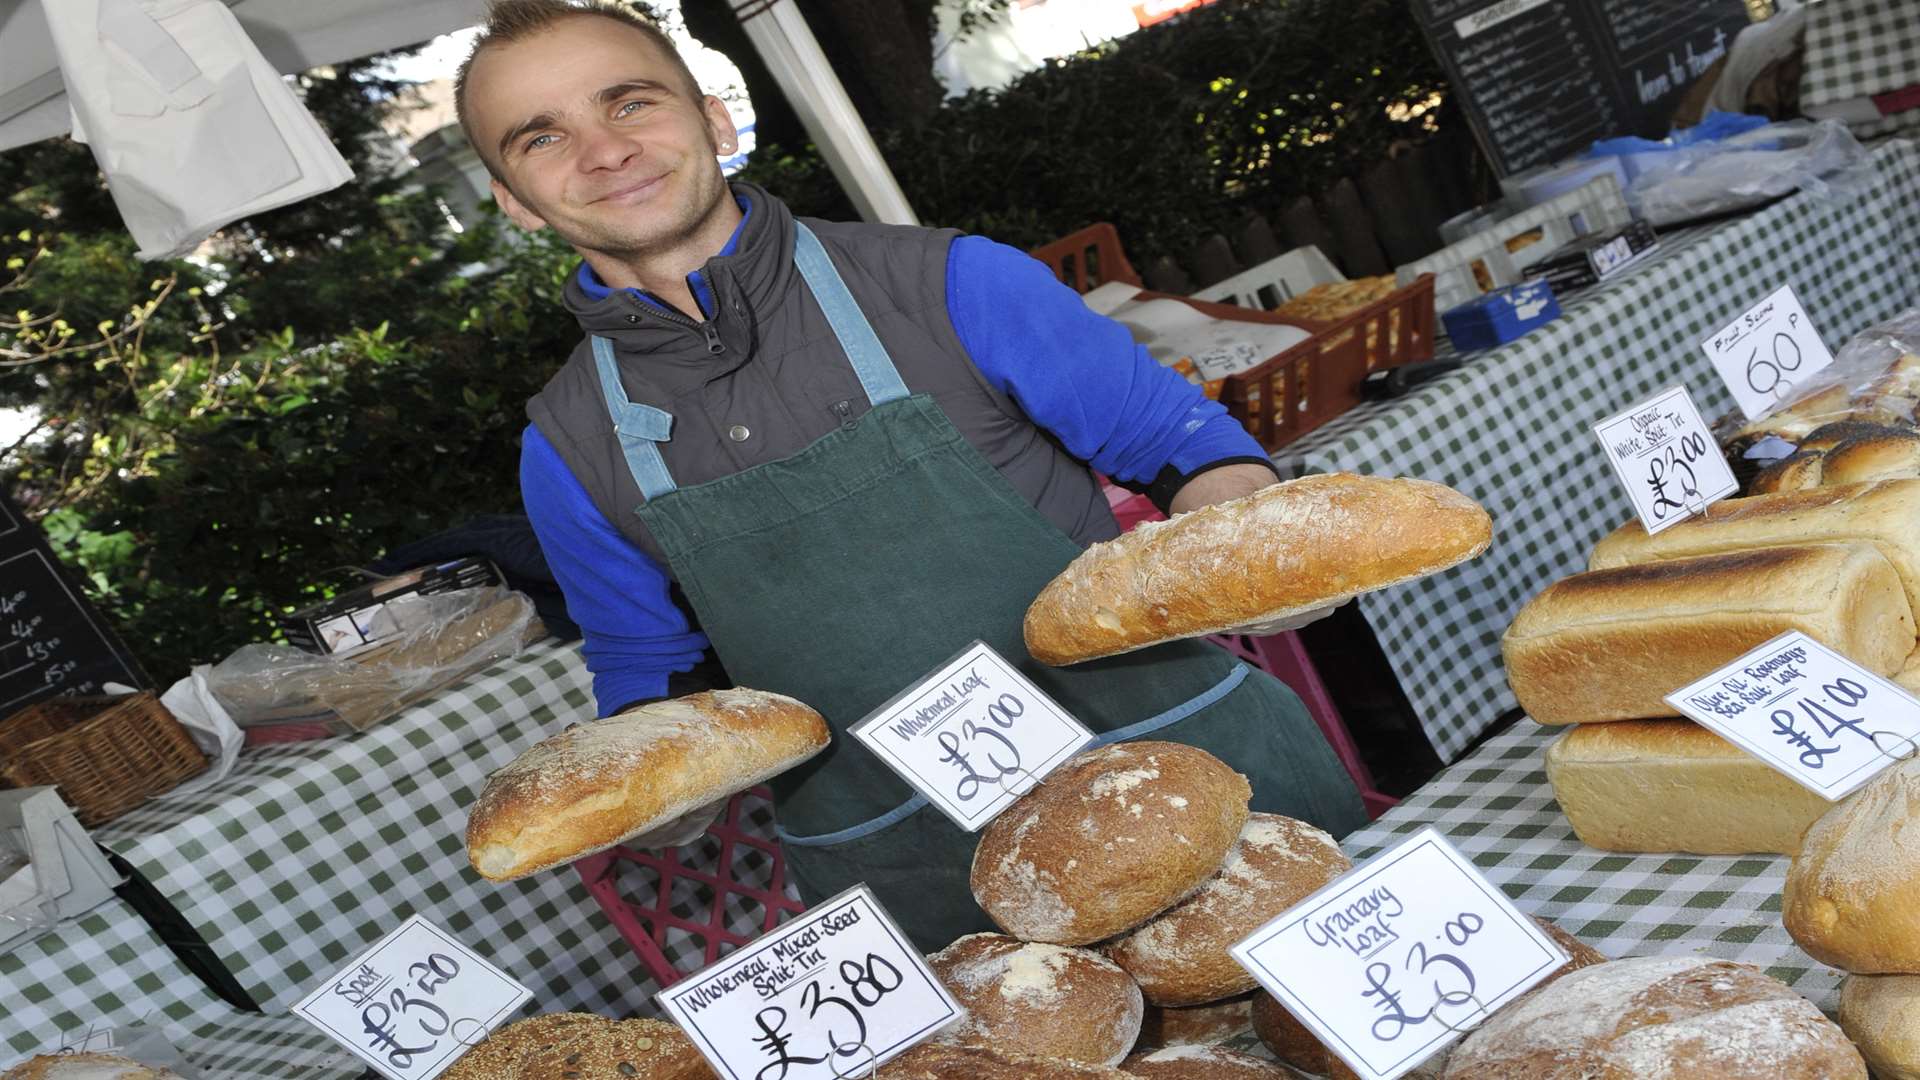 Freshly baked bread at the Broadstairs Food Festival